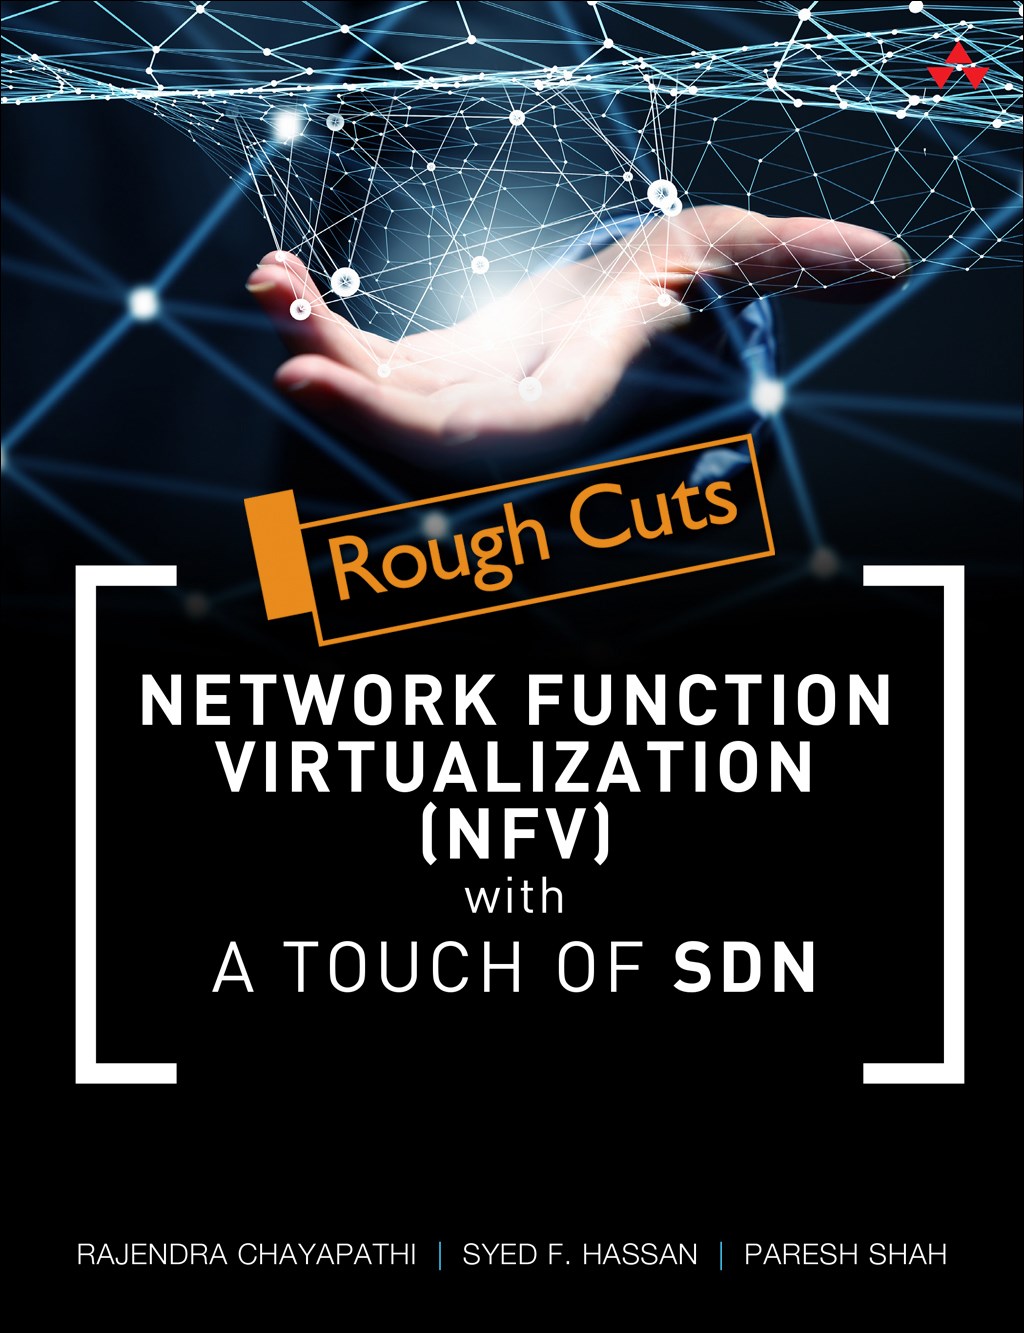 Network Functions Virtualization (NFV) with a Touch of SDN, Rough Cuts